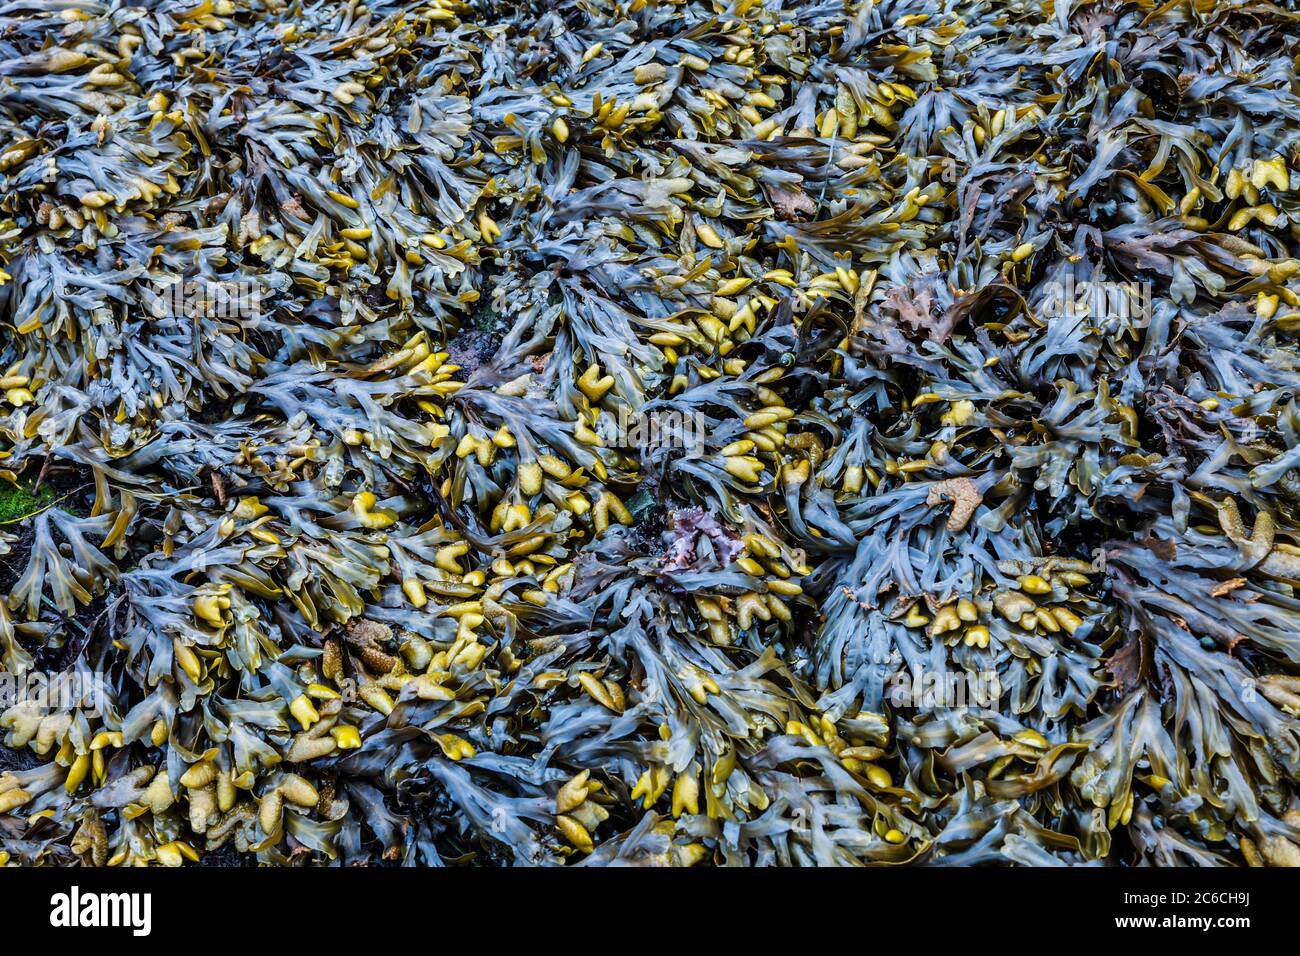 Seaweed bed detail on the Pacific Coast of the Olympic Penninsula of Washington State, USA. Stock Photo